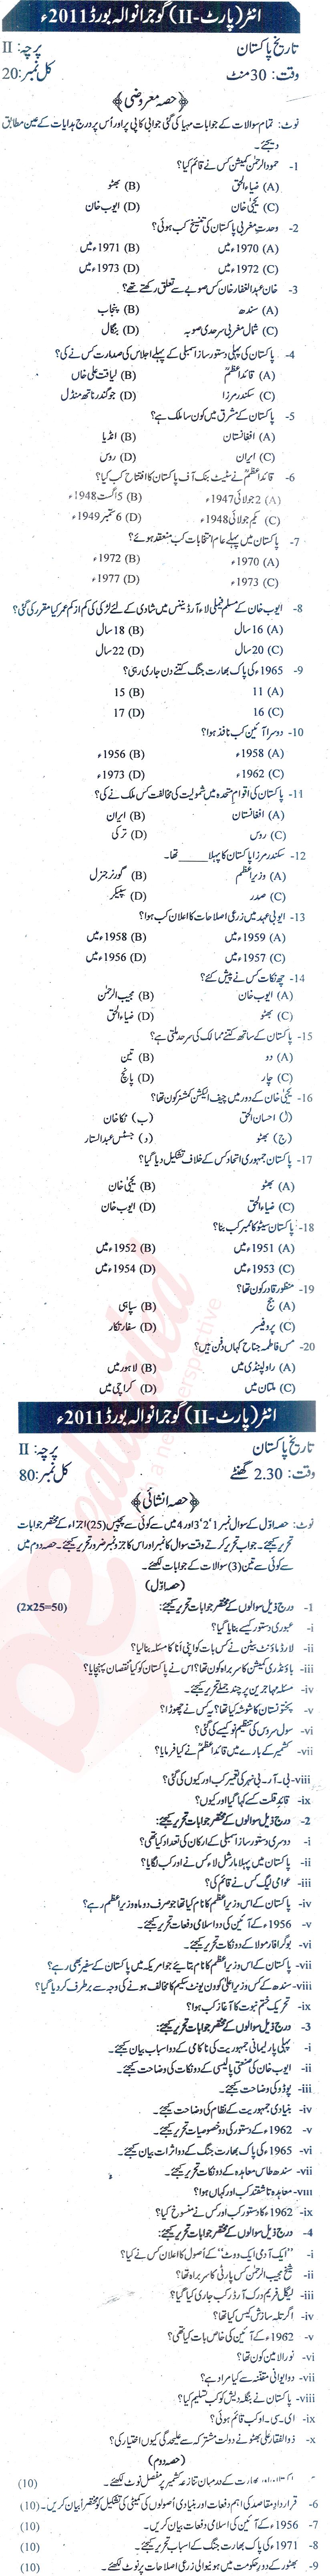 Pakistan History FA Part 2 Past Paper Group 1 BISE Gujranwala 2011